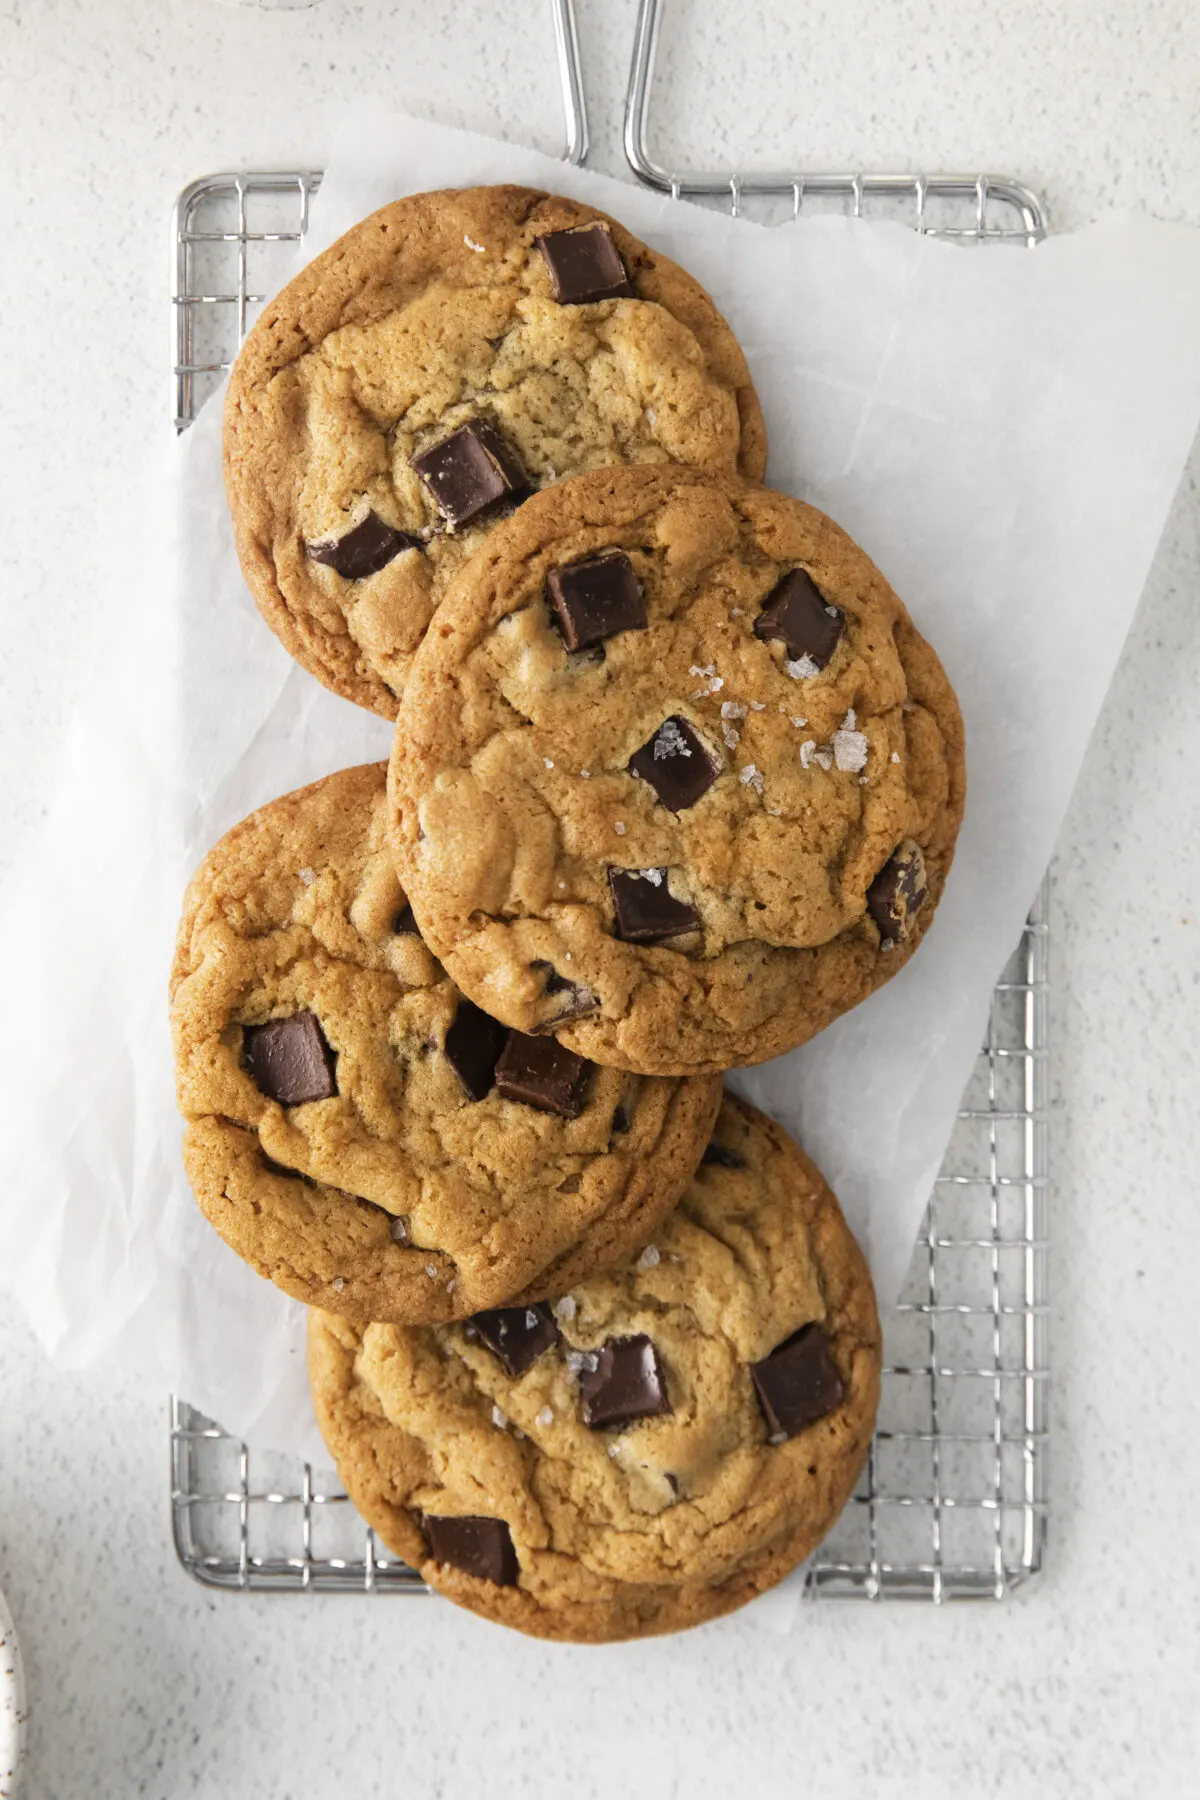 Love chocolate chip cookies? This salted tahini chocolate chip cookies recipe is a must-try for a unique and flavourful twist on the classic!